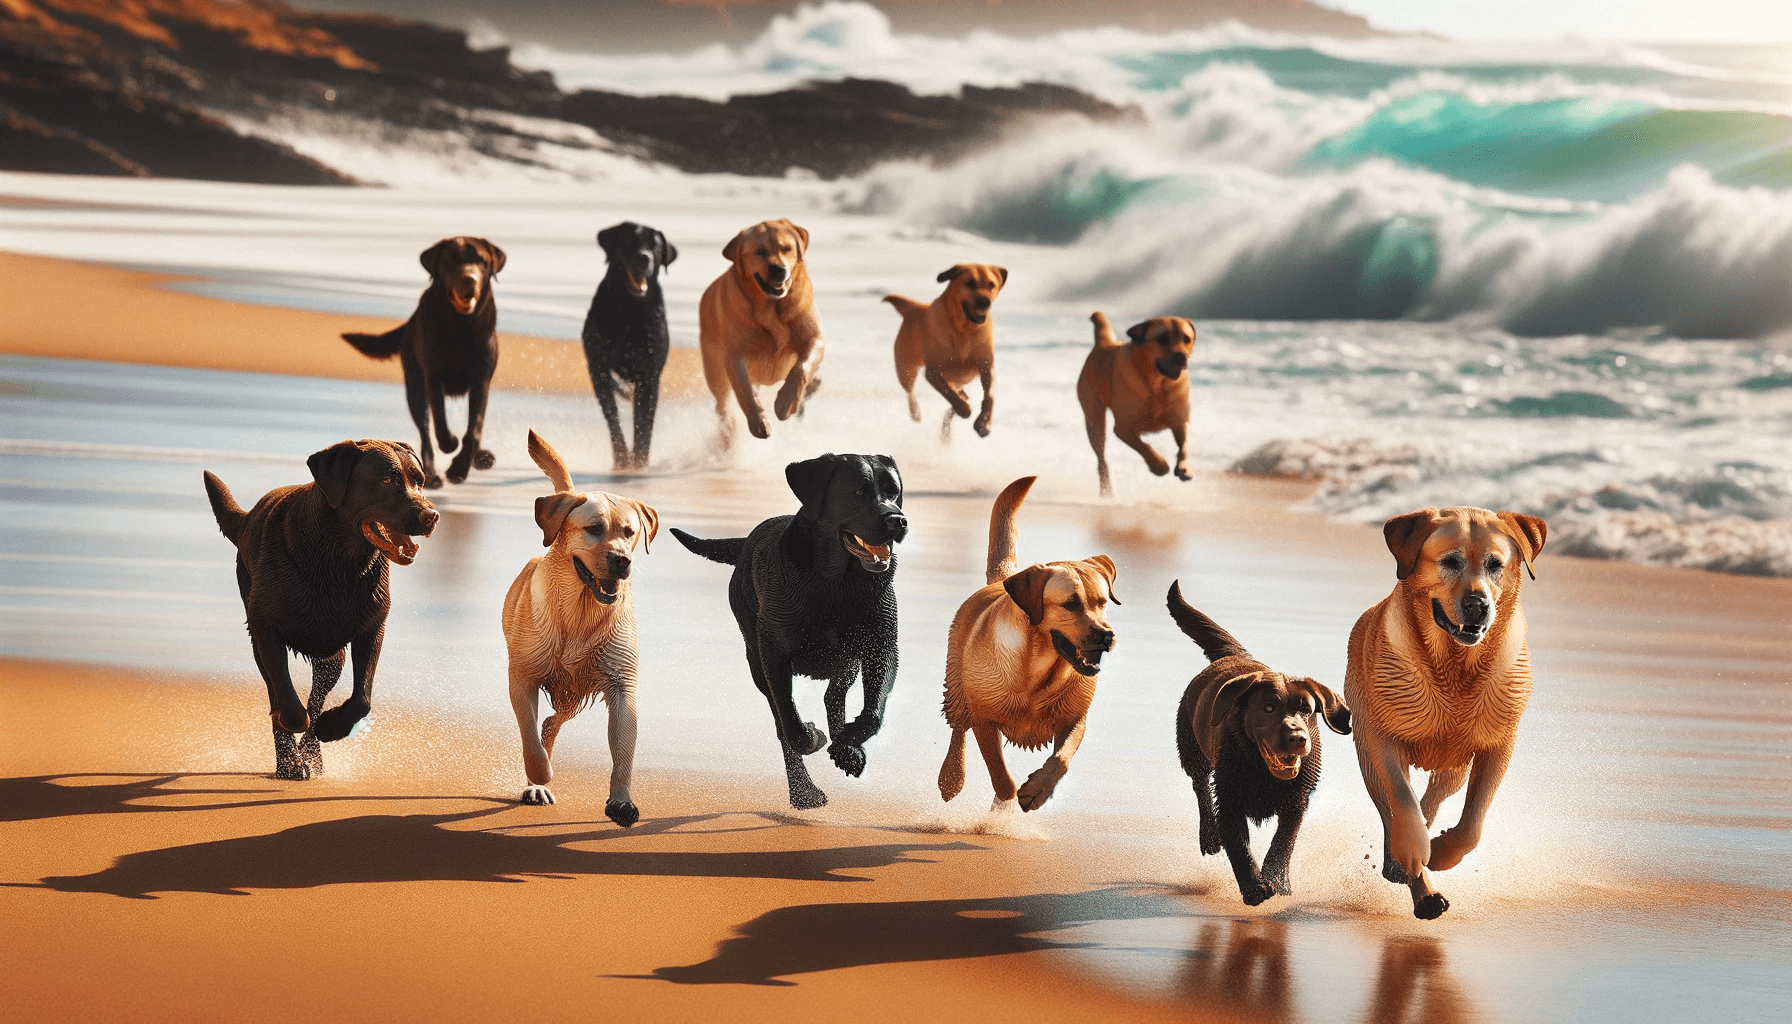 Labrador Retrievers (Labradorii) running along the beach, showcasing their love for outdoor adventures with waves crashing in the background. The scene captures several Labradors in motion.